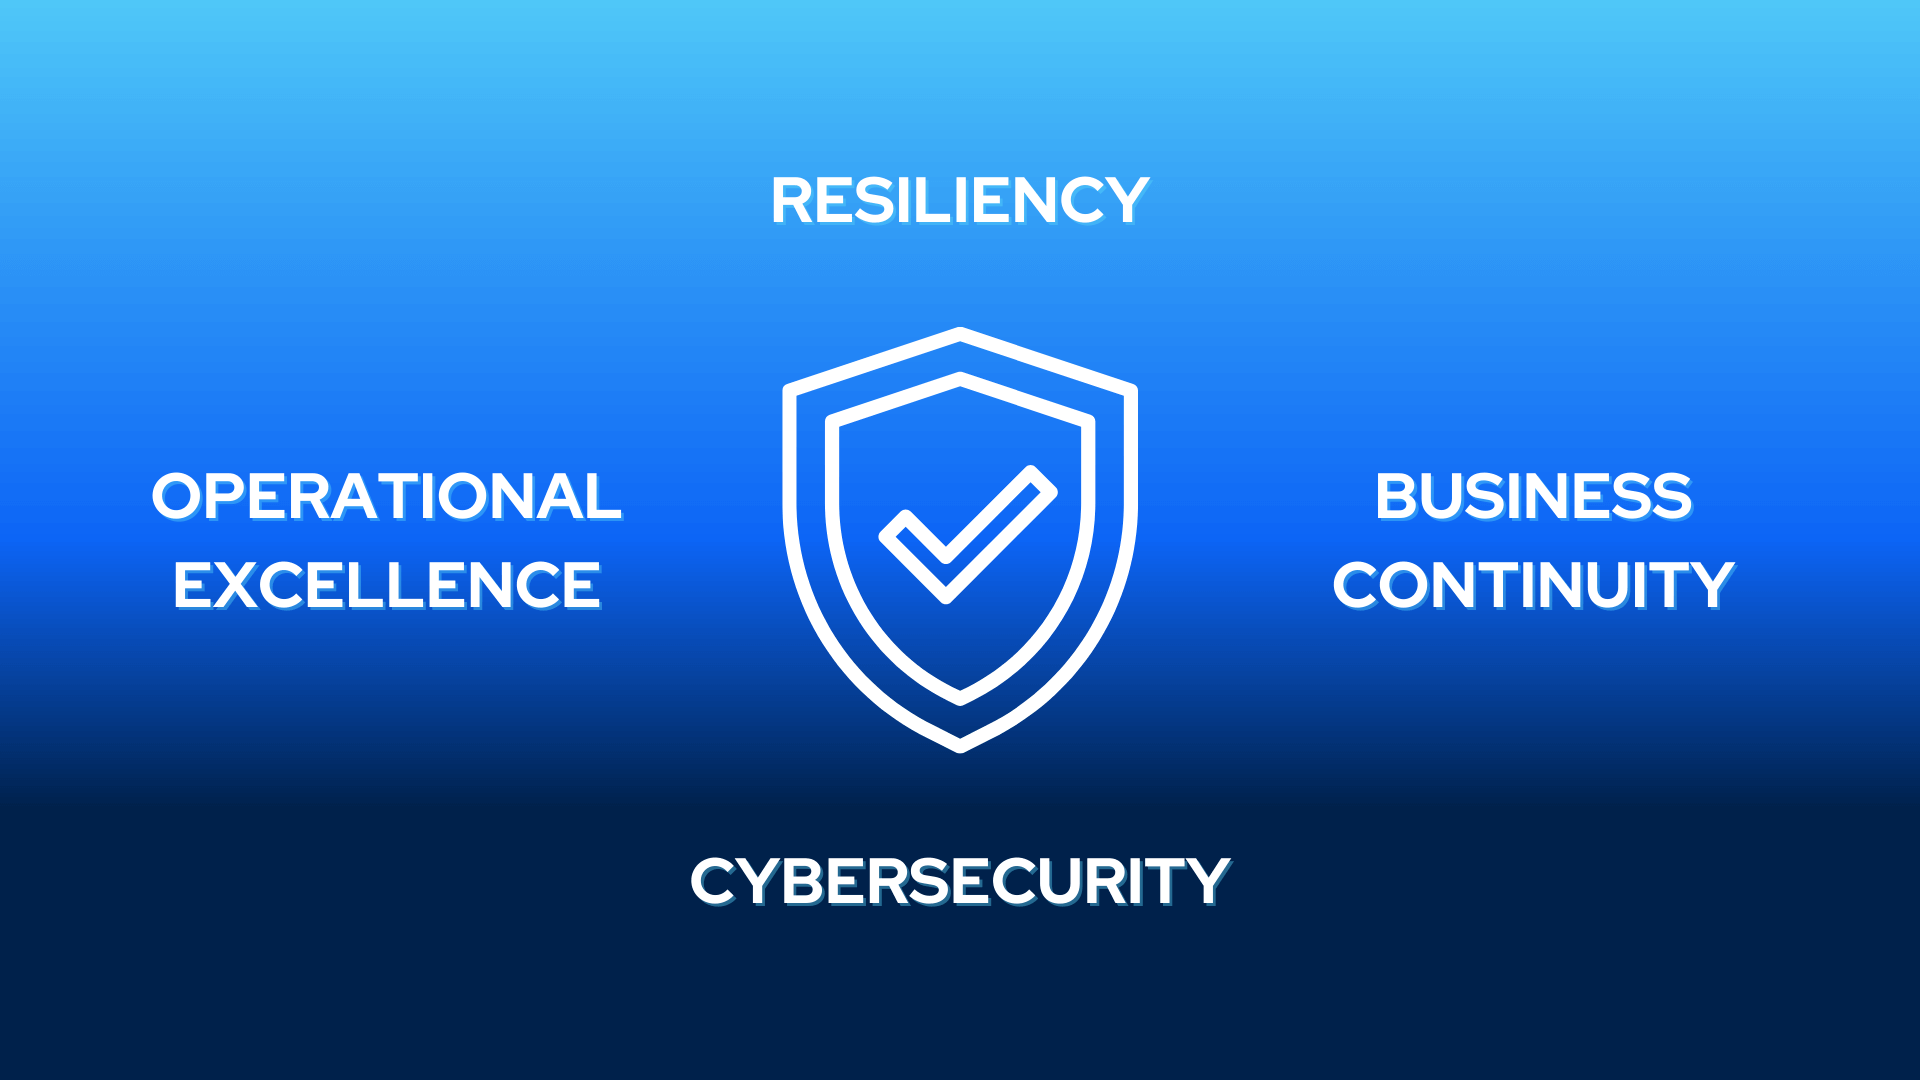 An illustration with a shield with a checkmark in the middle and 4 descriptive titles around it that read: Resiliency, Business Continuity, Cybersecurity and Operational Excellence.